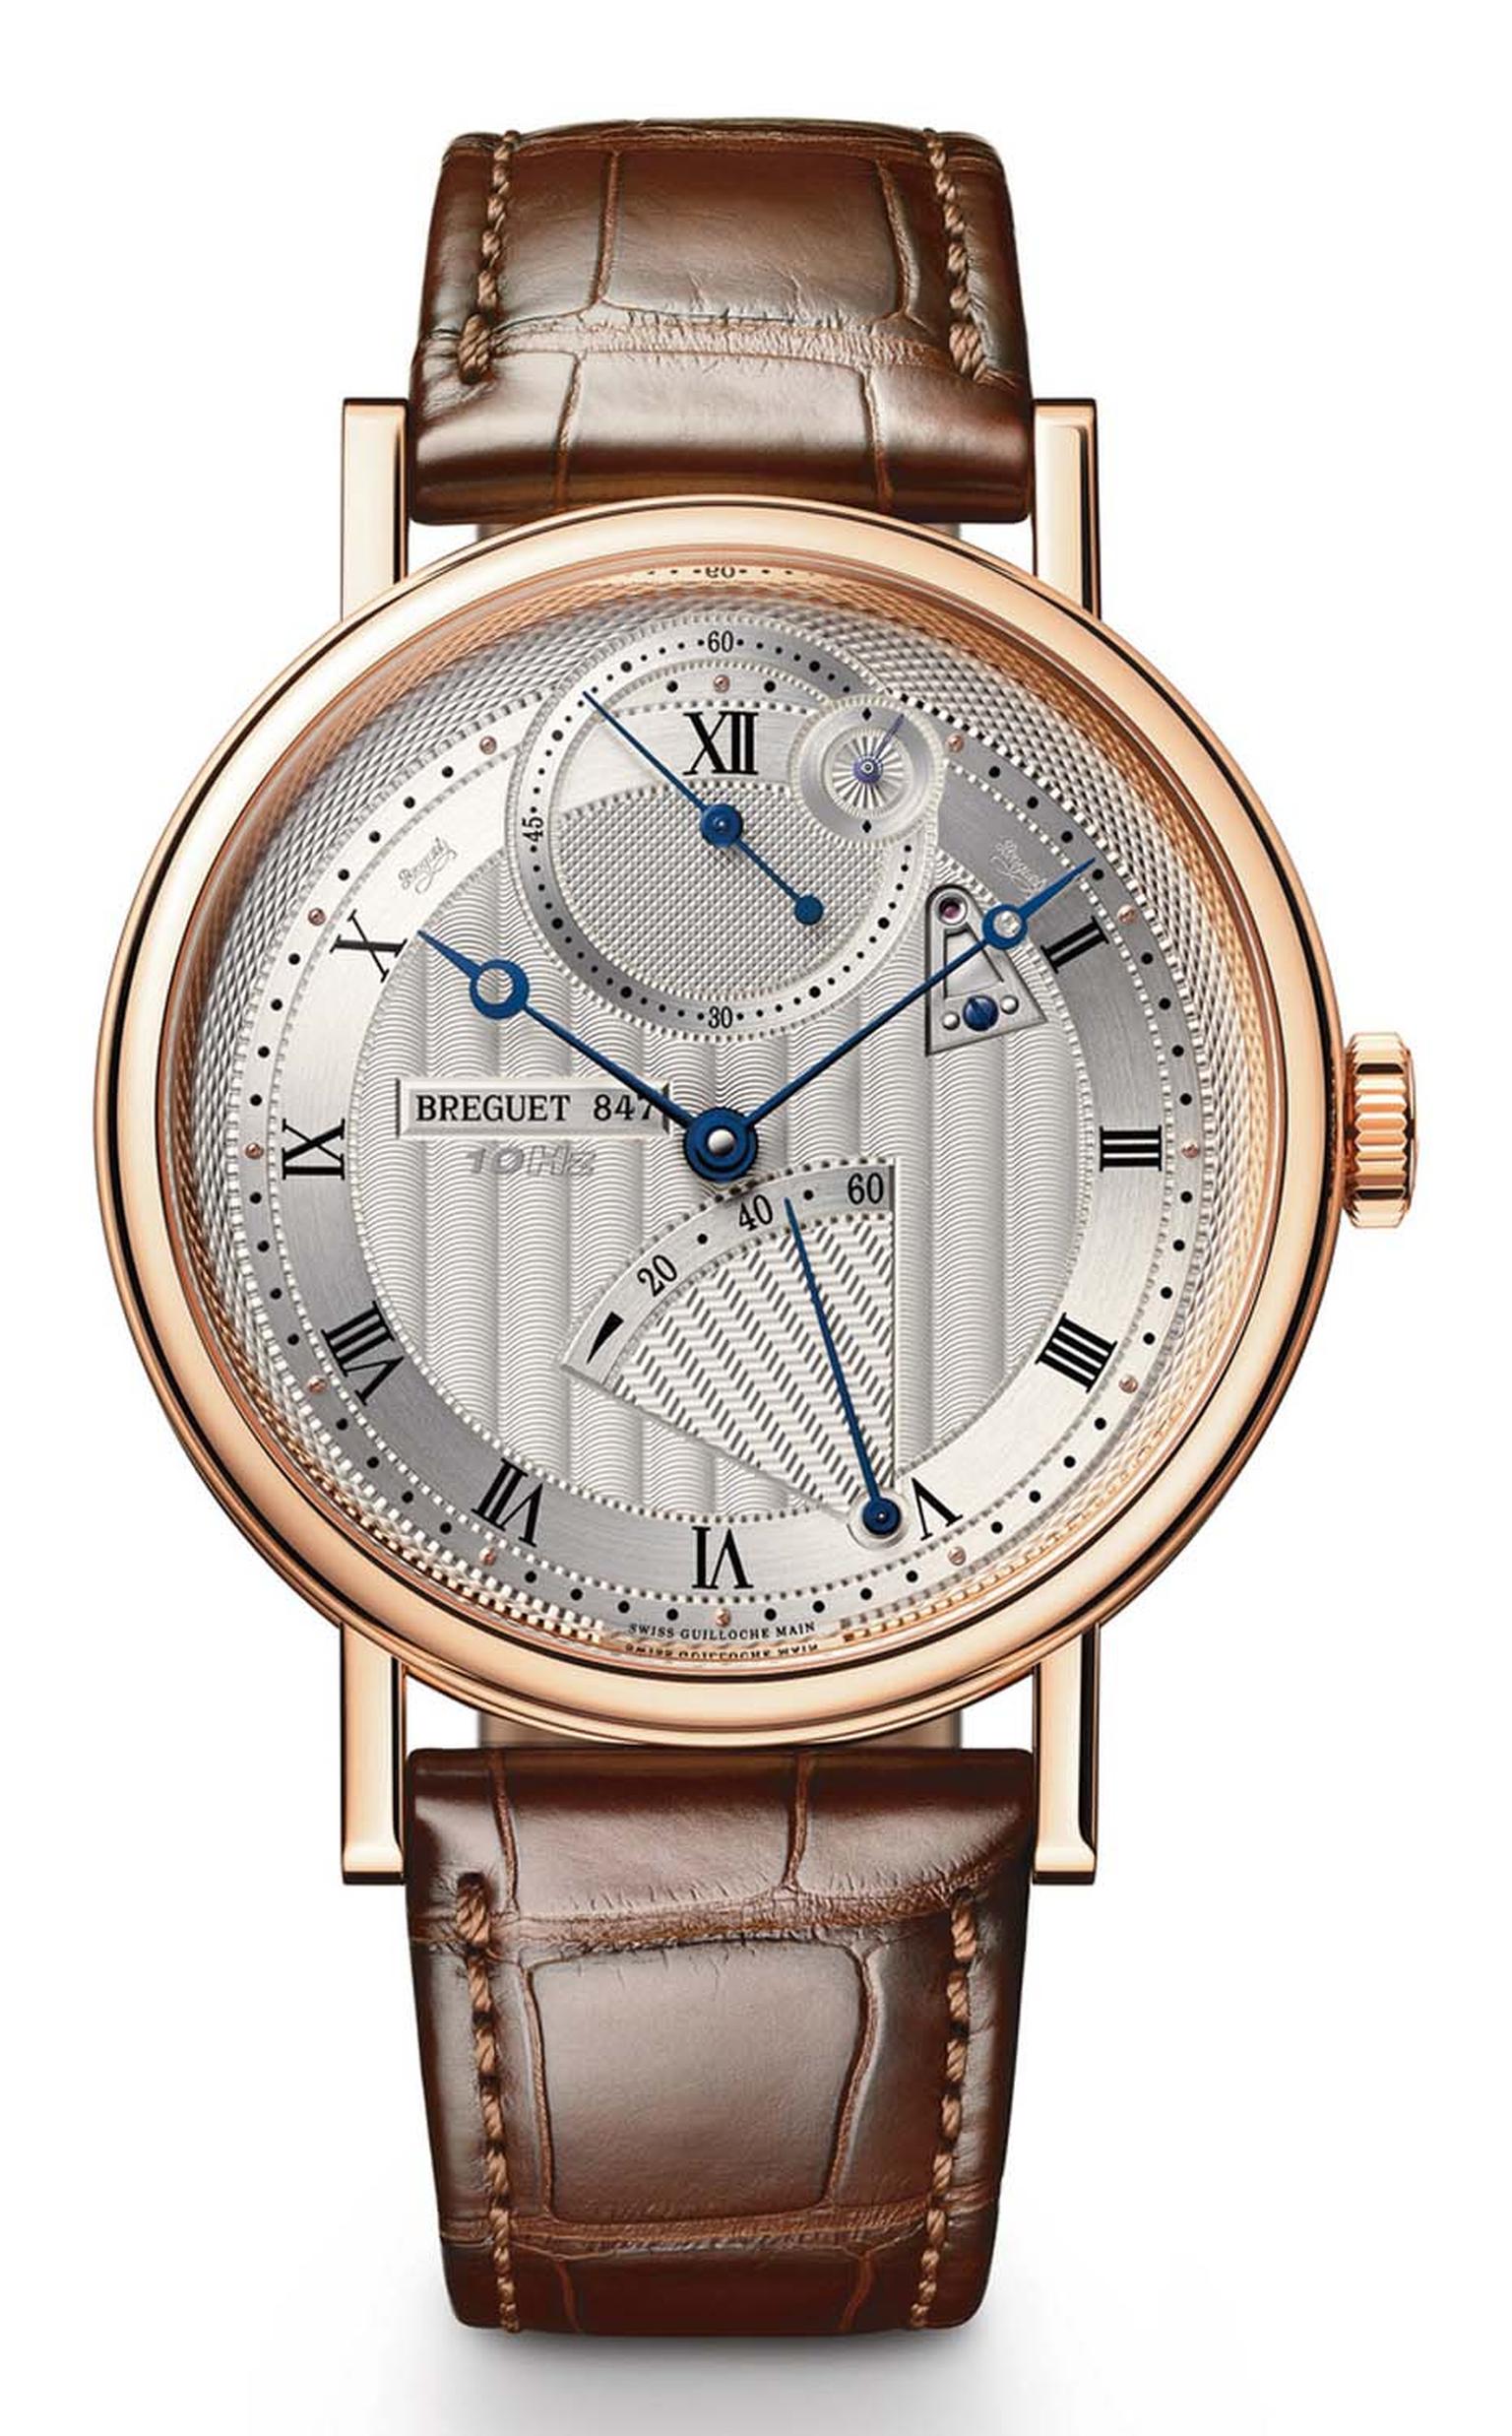 Breguet’s Classique Chronométrie took home the GPHG's grand prize, known as the Aiguille d’Or - or golden hand. With its handsome, classically-styled dial, the movement of the watch is anything but classical. Inside the 41mm rose gold case is a state-of-t